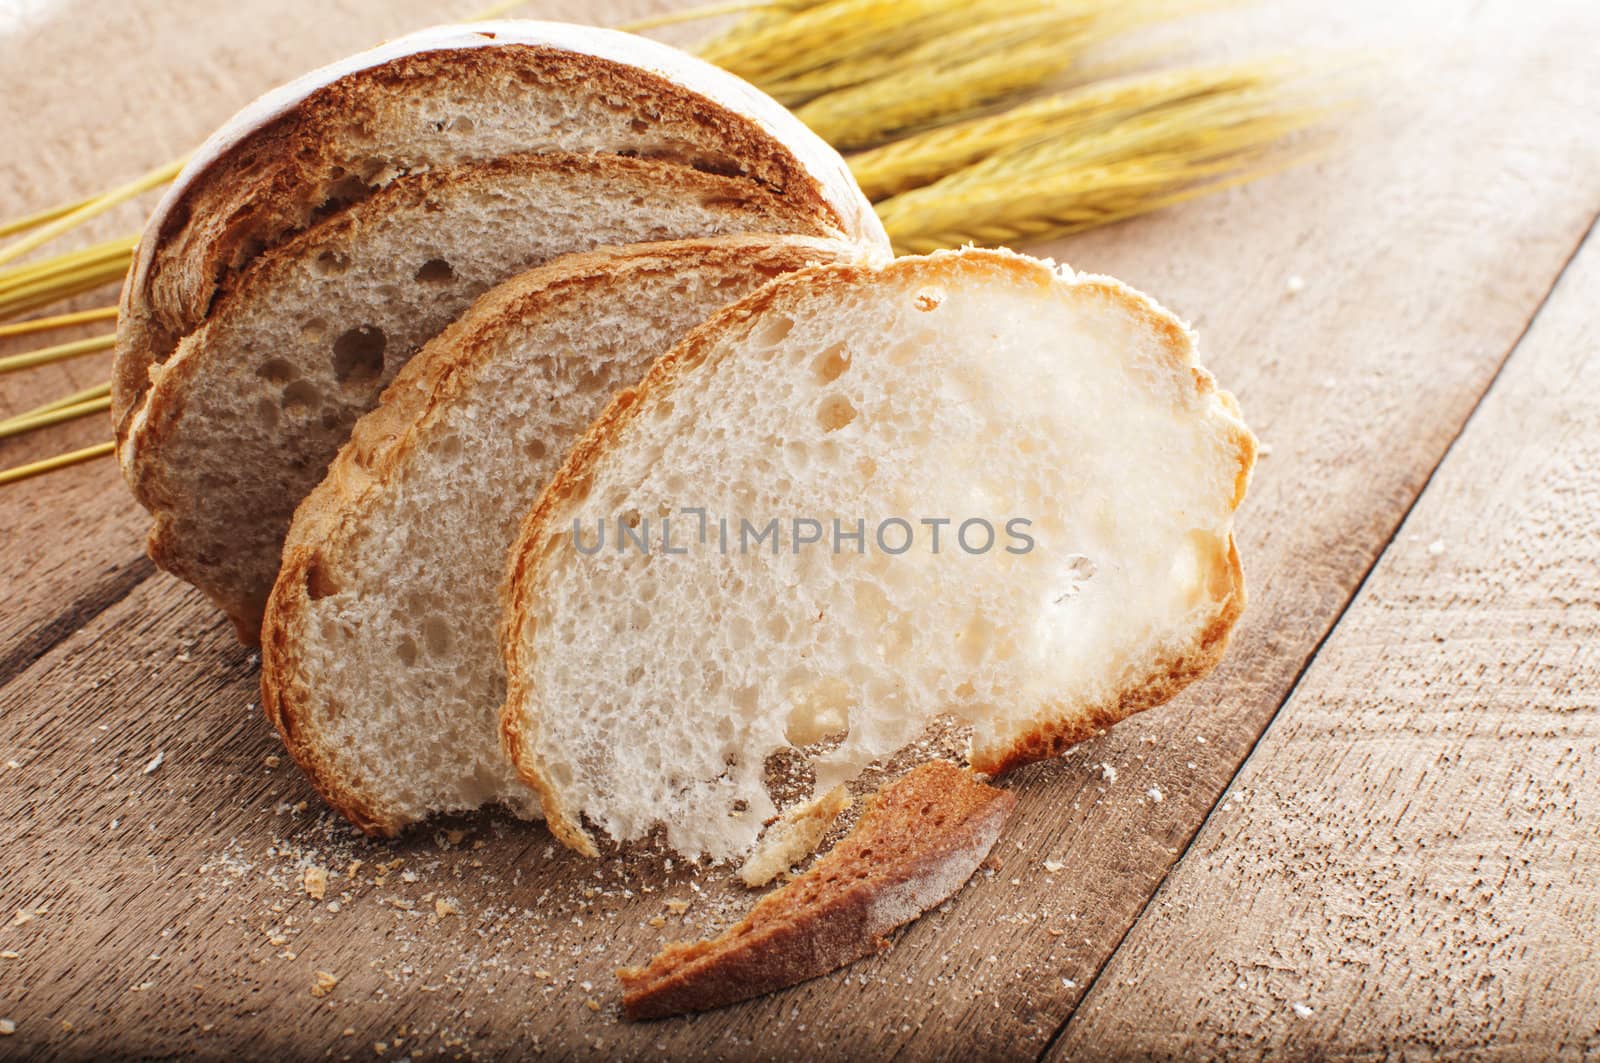 sliced bread and wheat on the wooden table by TanawatPontchour